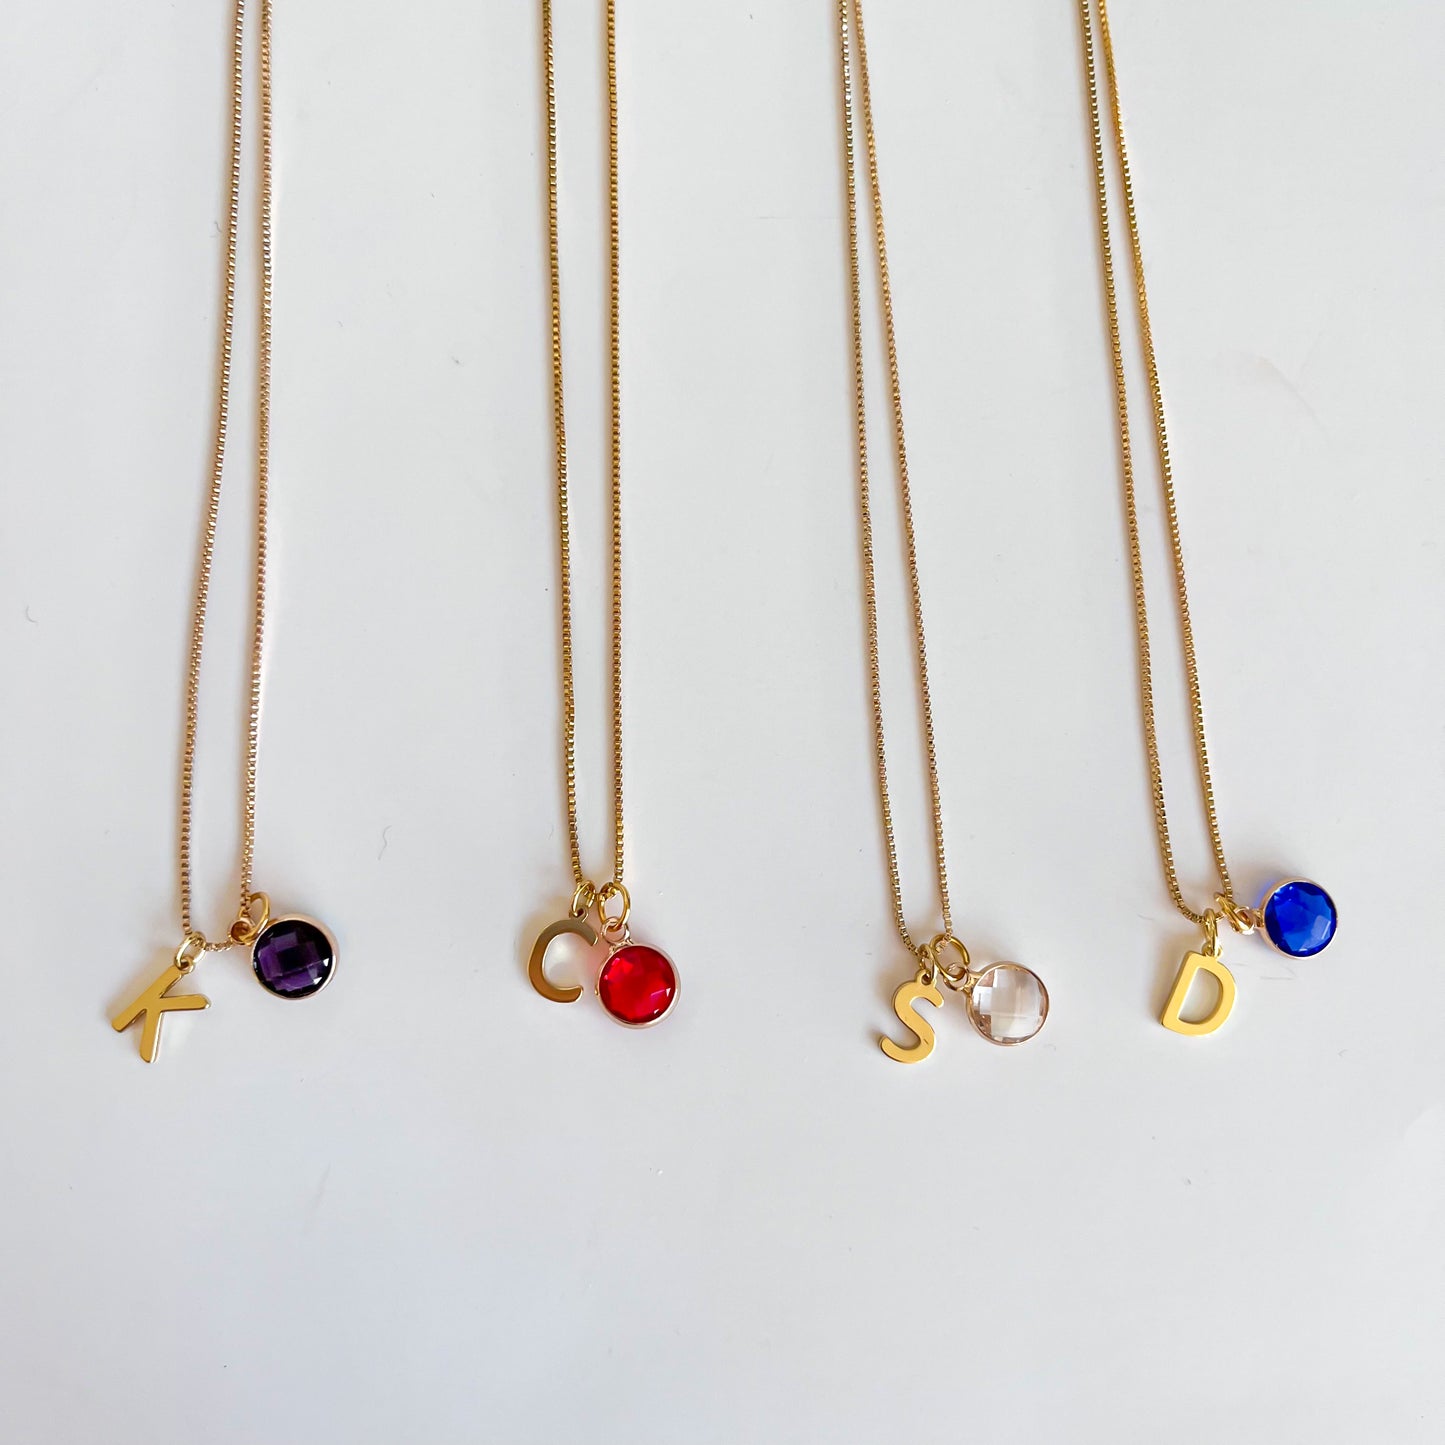 Initial Letter + Birthstone Necklace - Gold Filled (Customize)